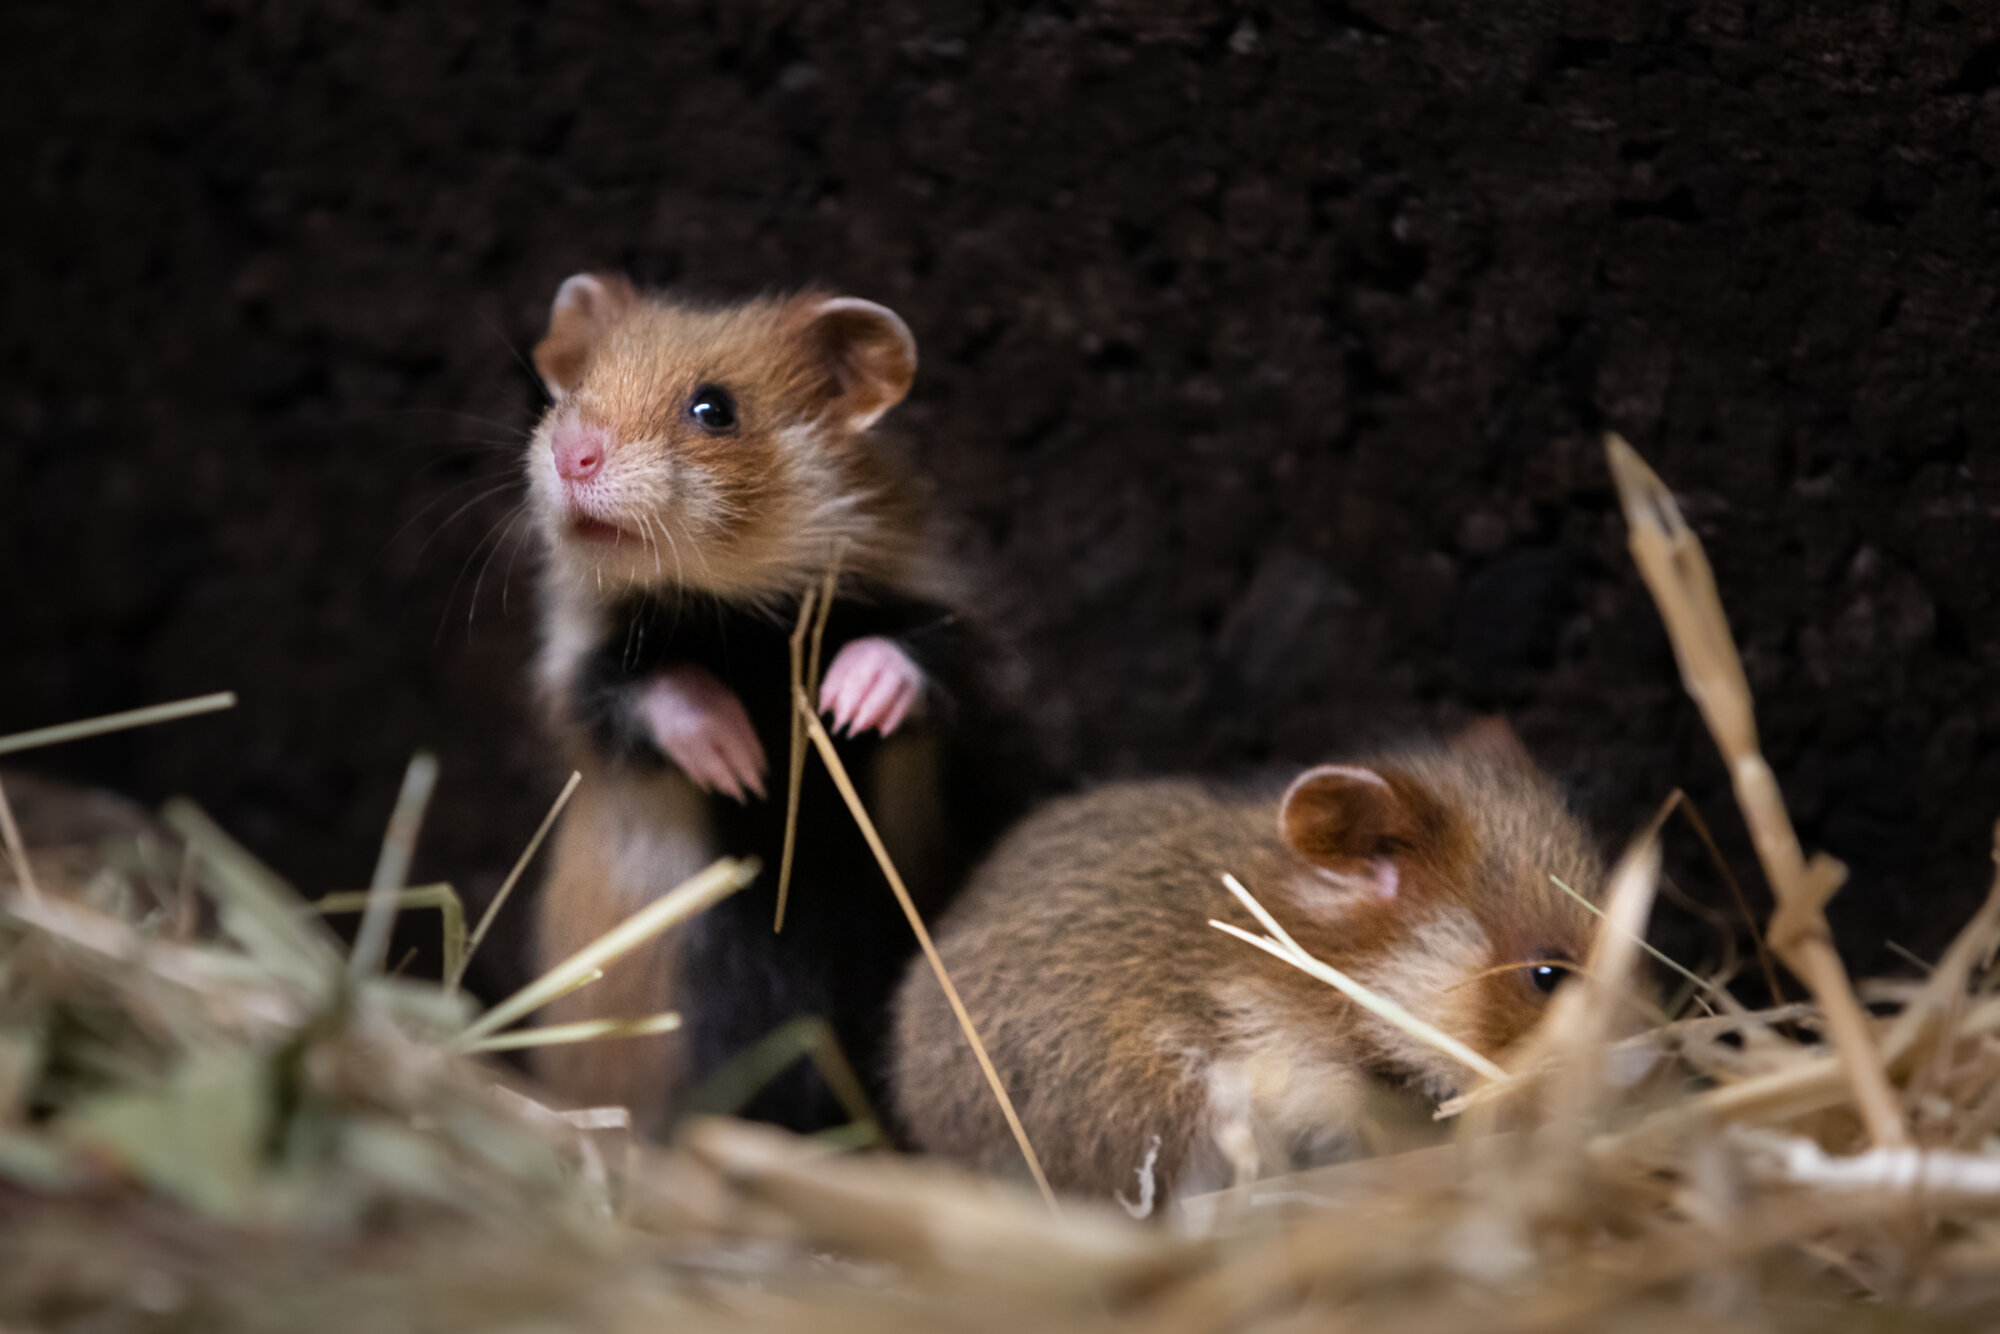 Will Pet Hamsters Released Into The Wild Survive?